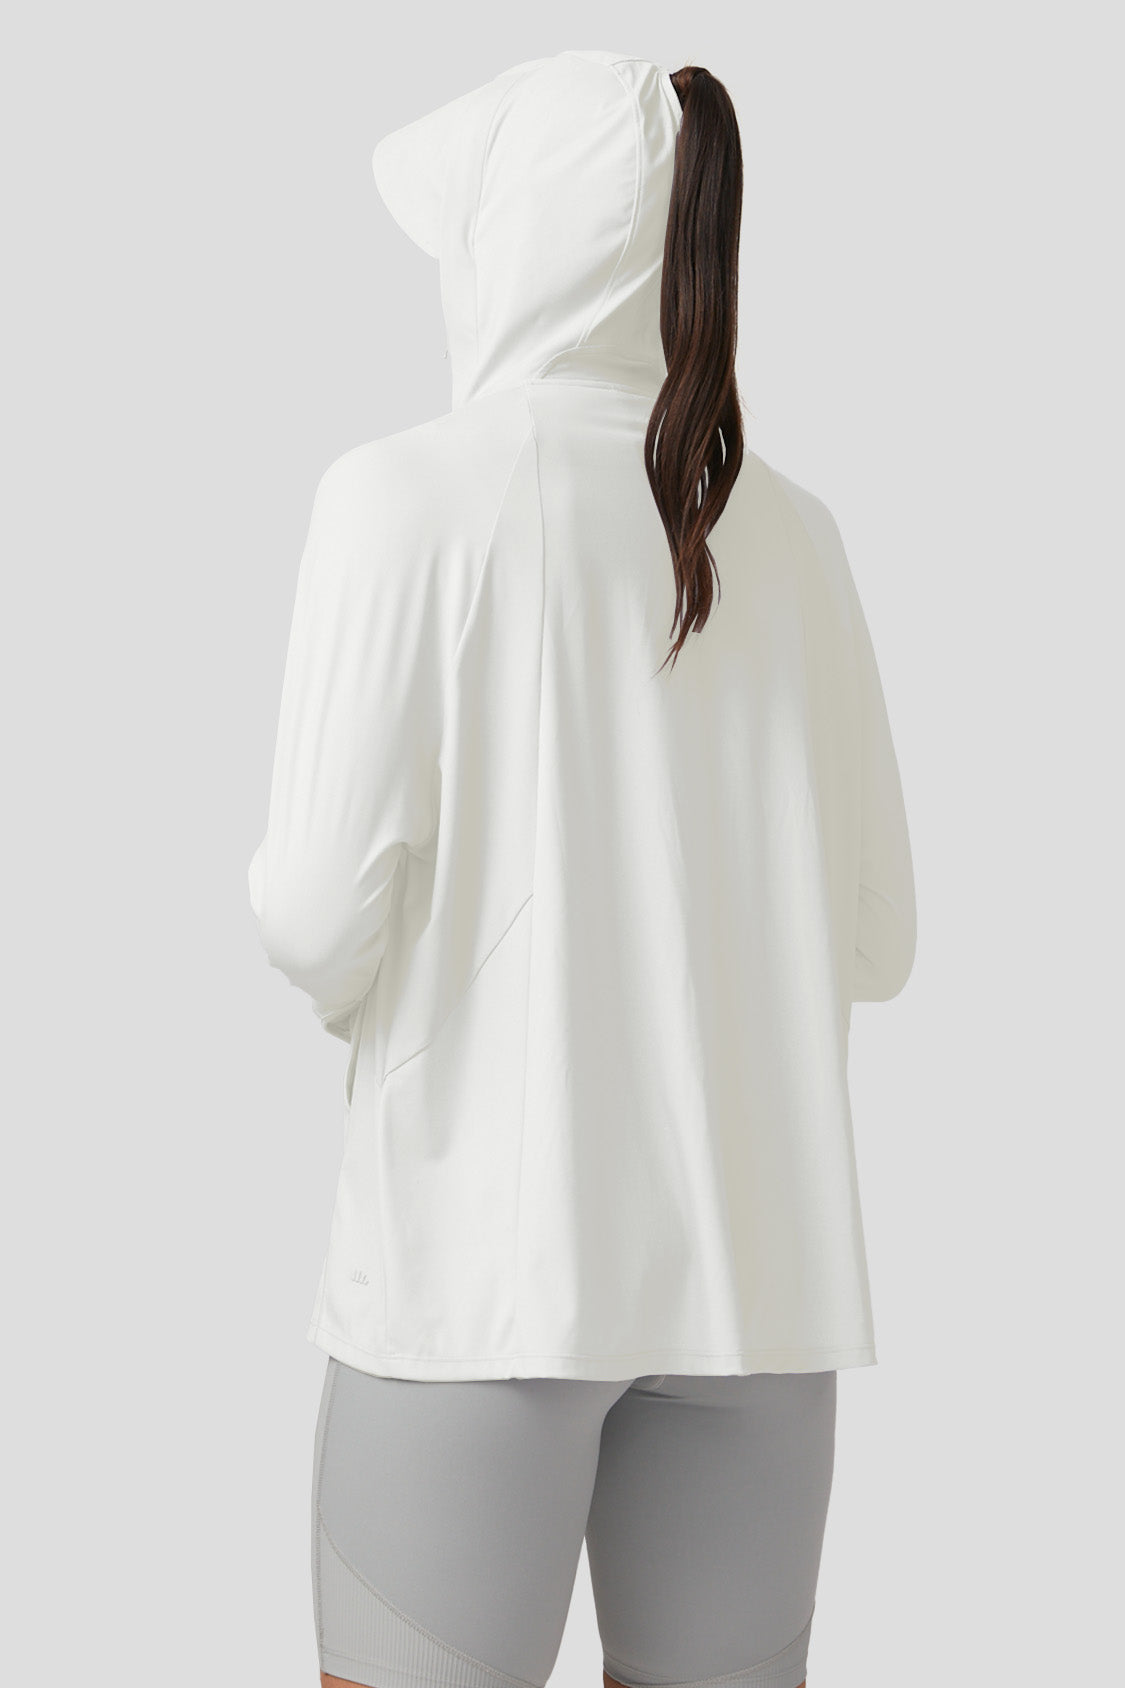 beneunder cooling uv sun protection jacket hoodie #color_creamy milk white